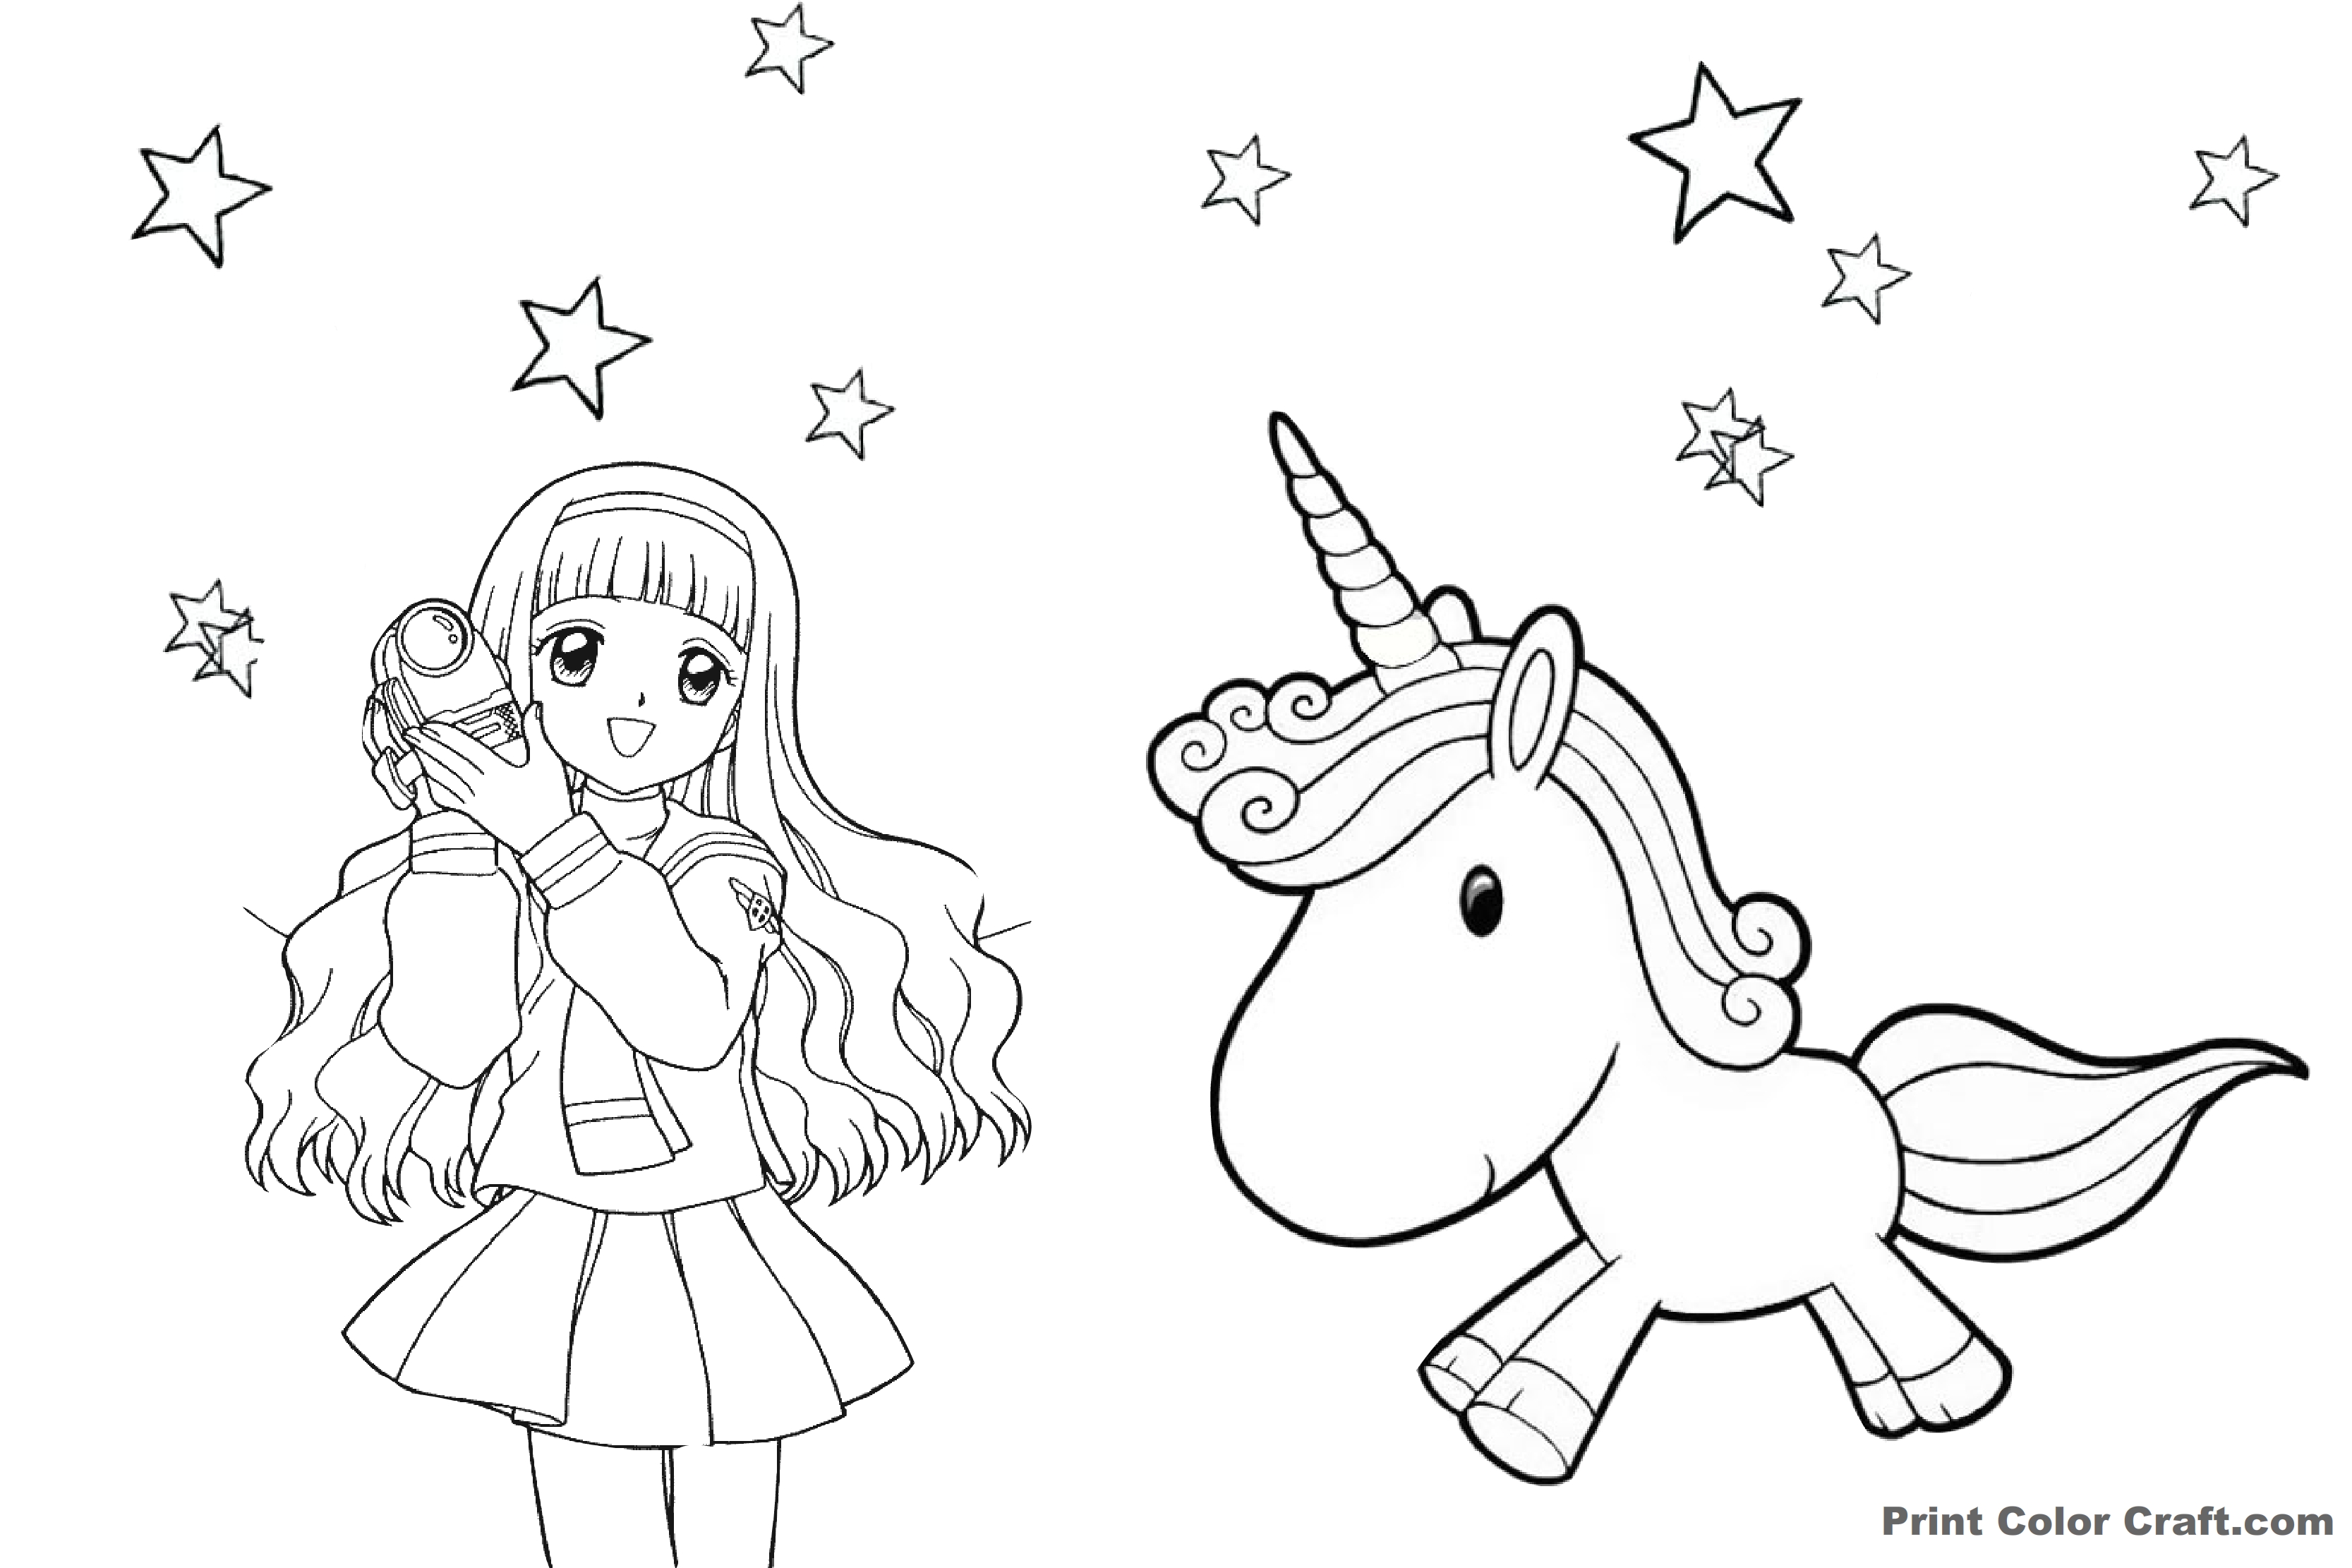 Download Adorable Unicorn Coloring Pages for Girls and Adults (Updated)